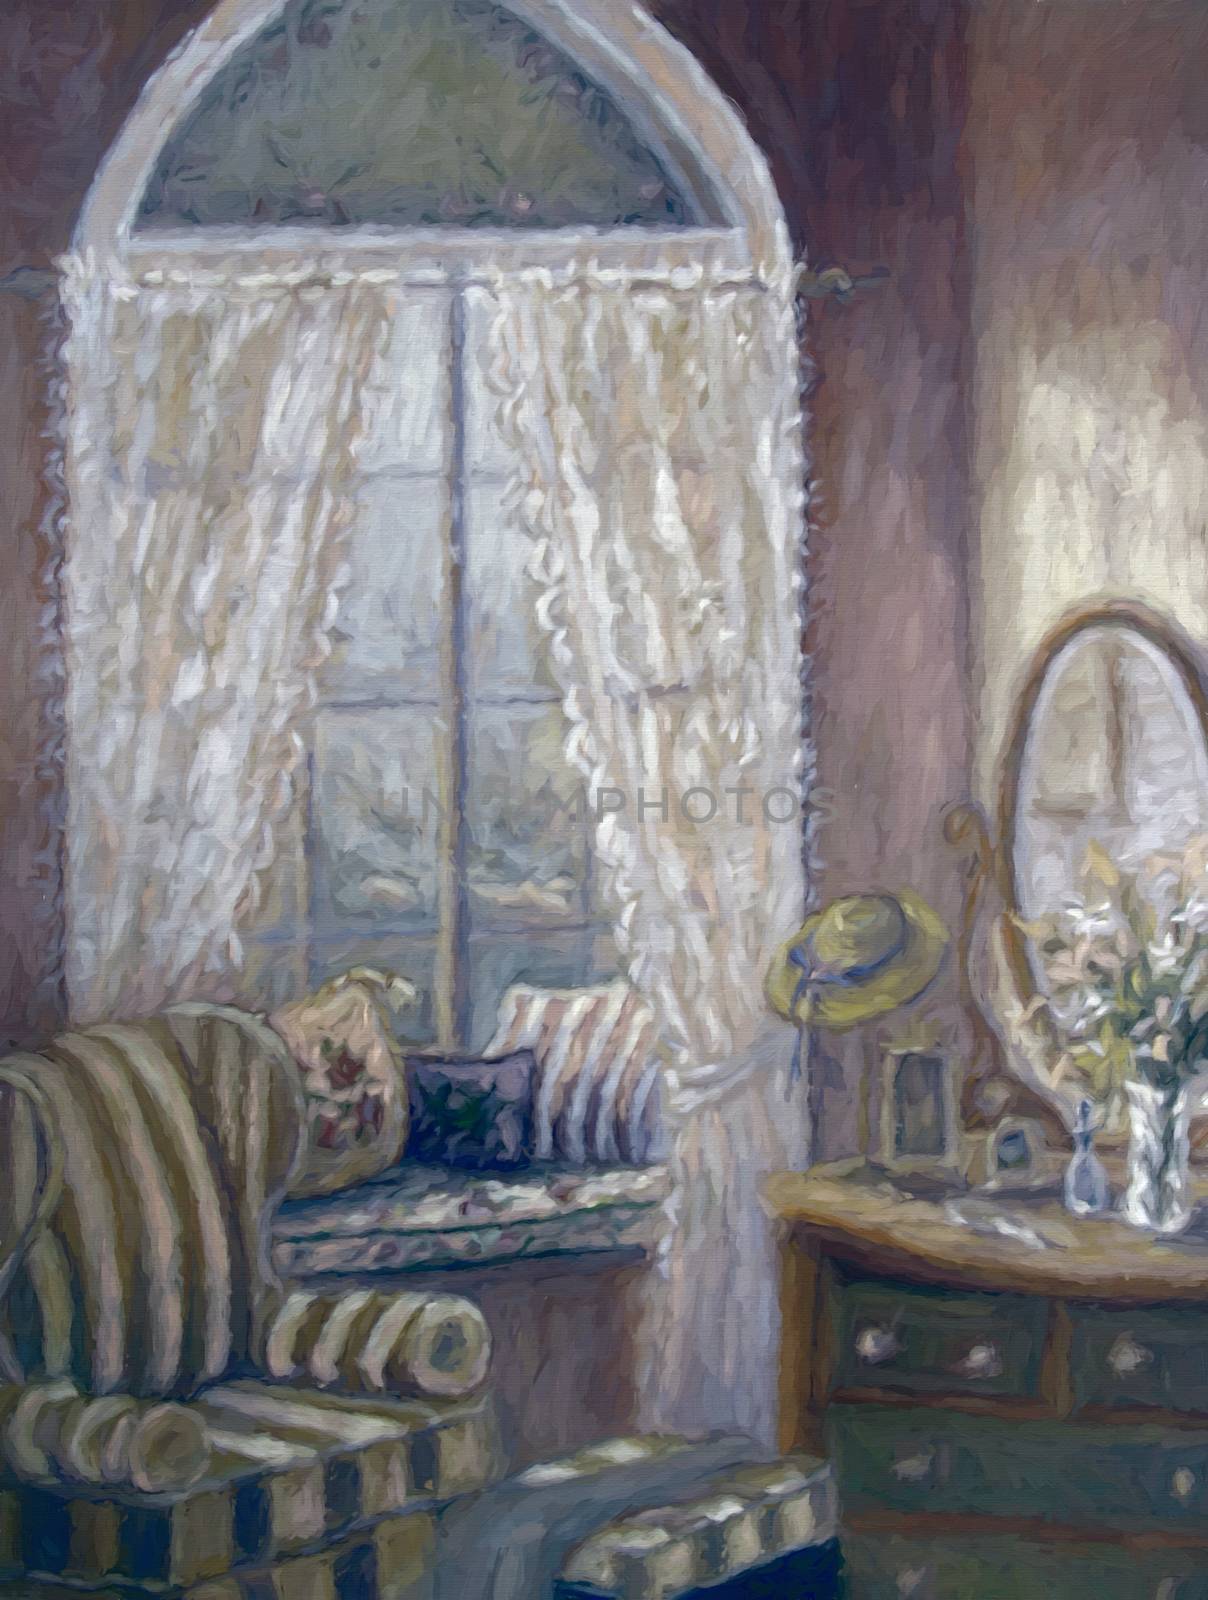 Painting of a child's bedroom, digitally altered by Sandralise